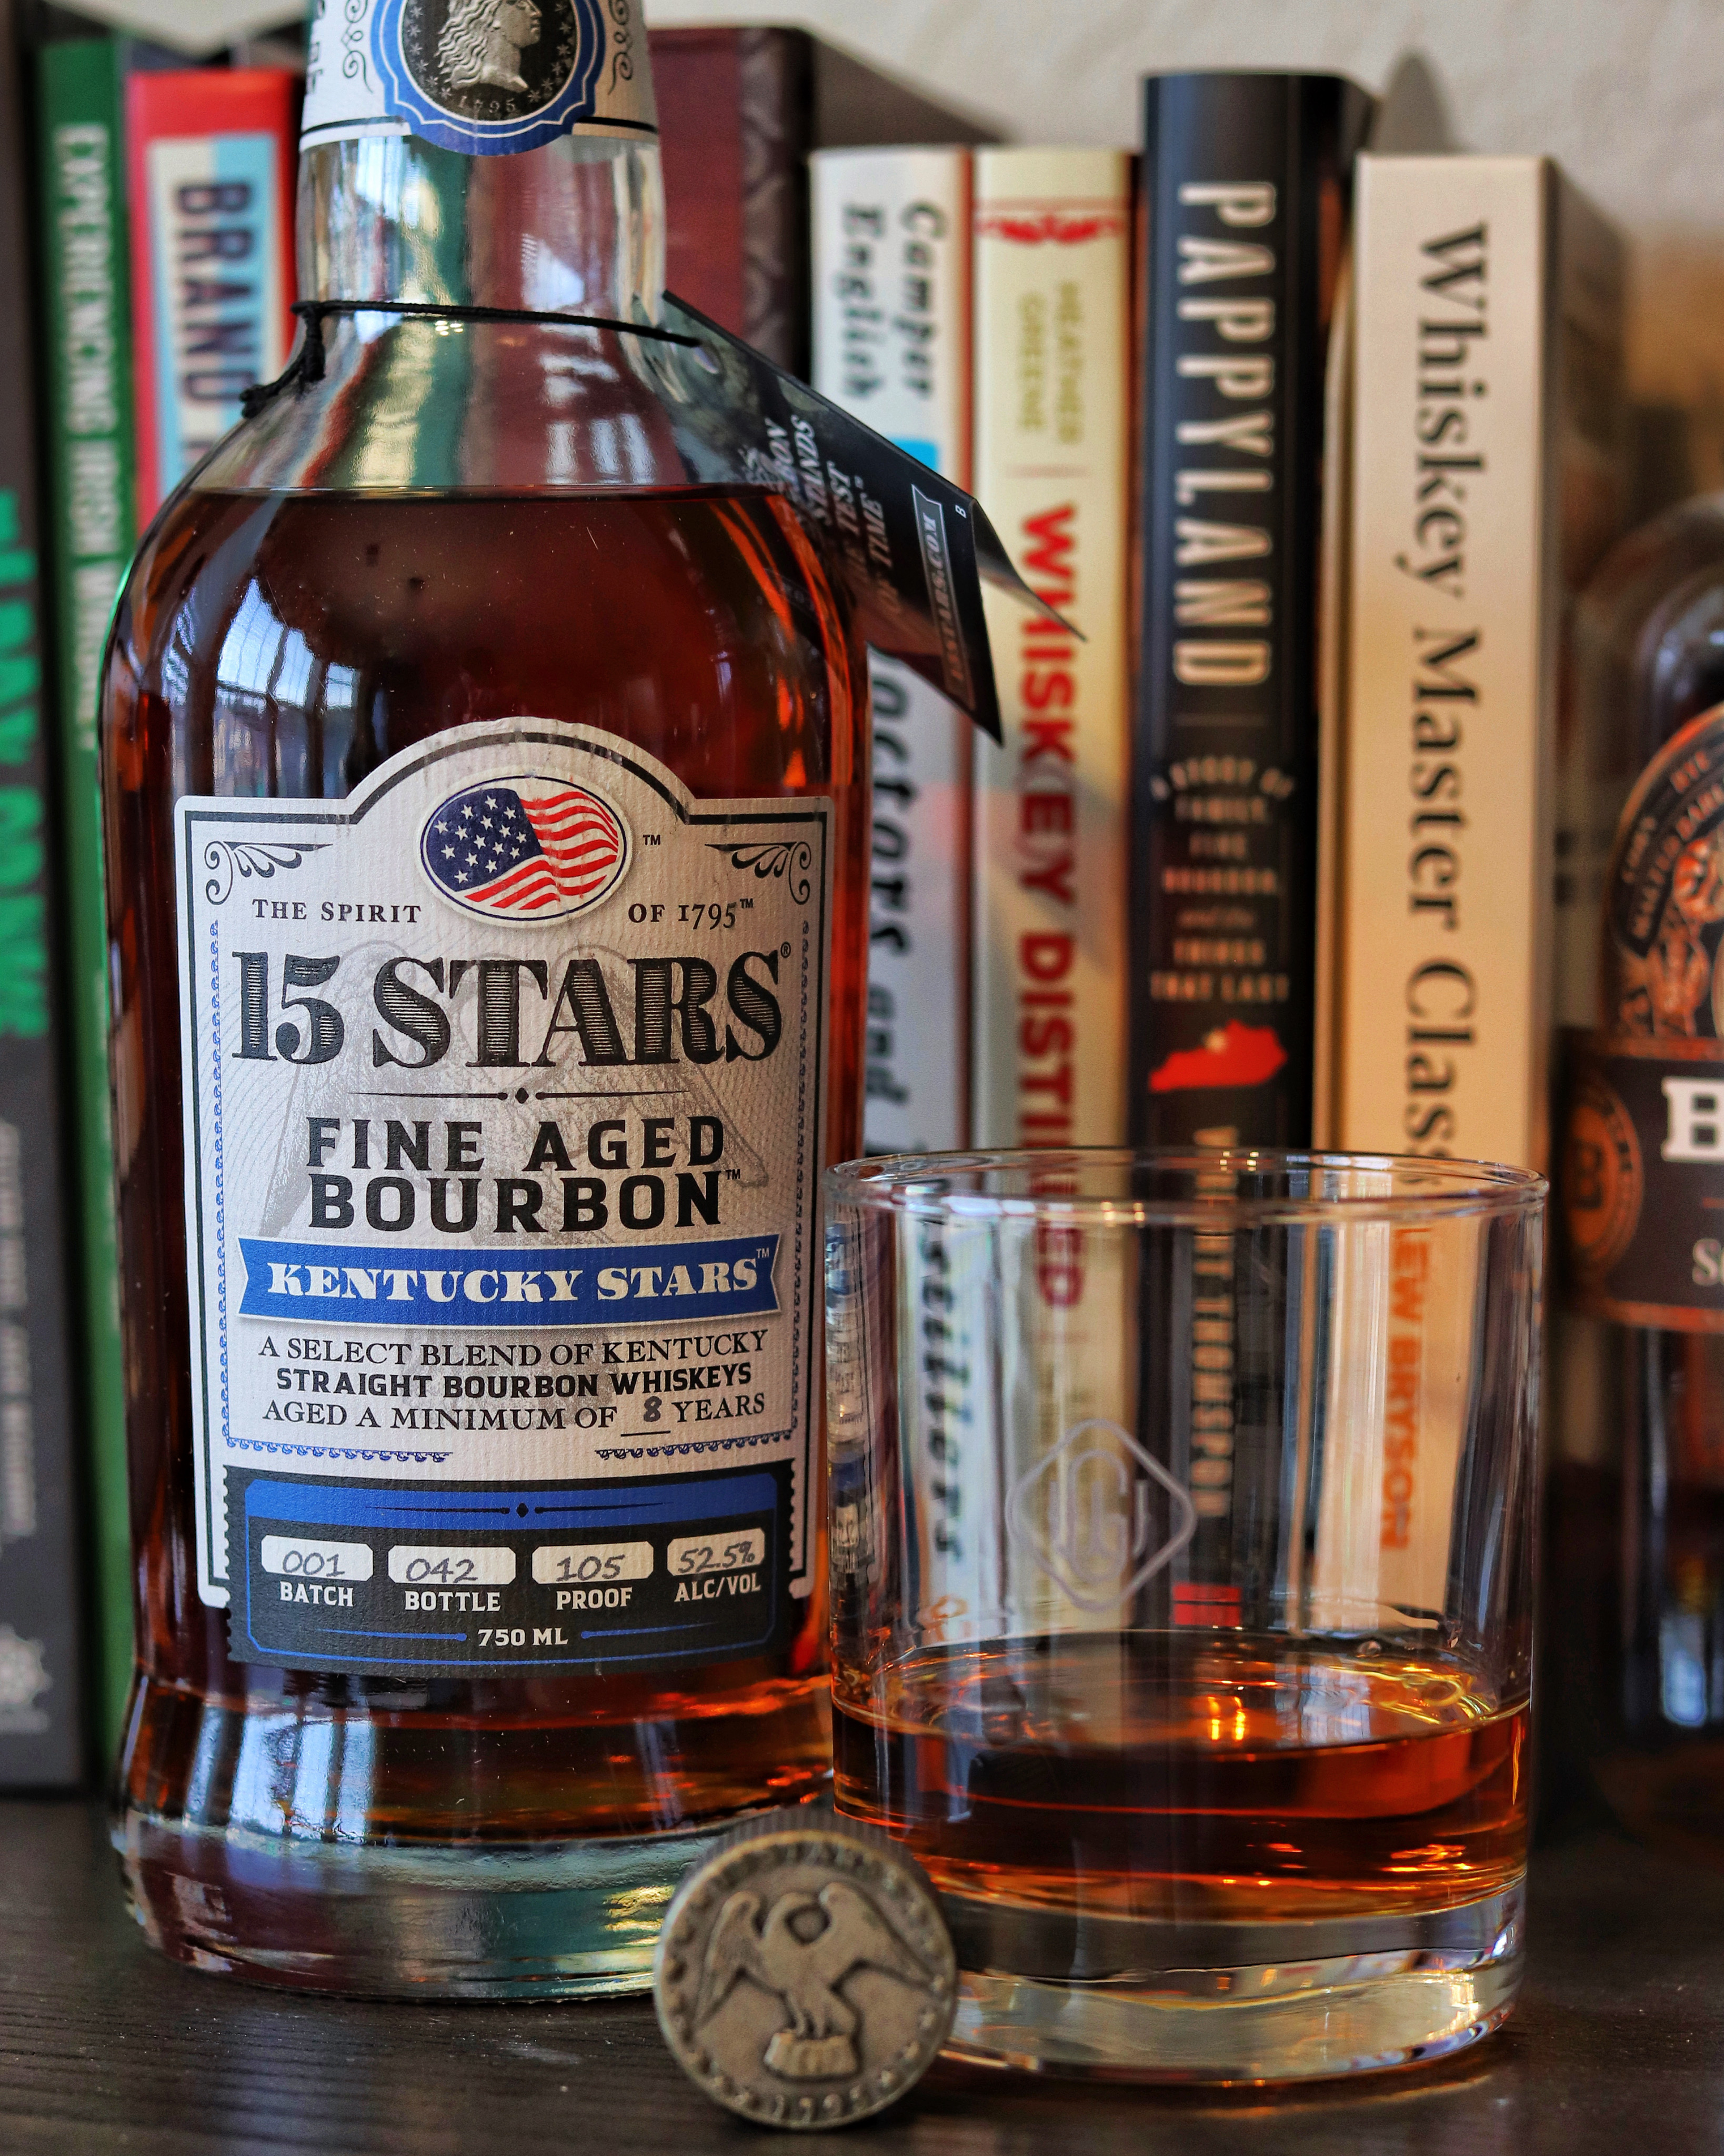 a bottle of Kentucky Bourbon on a bookshelf with several hardback books and a whiskey glass.